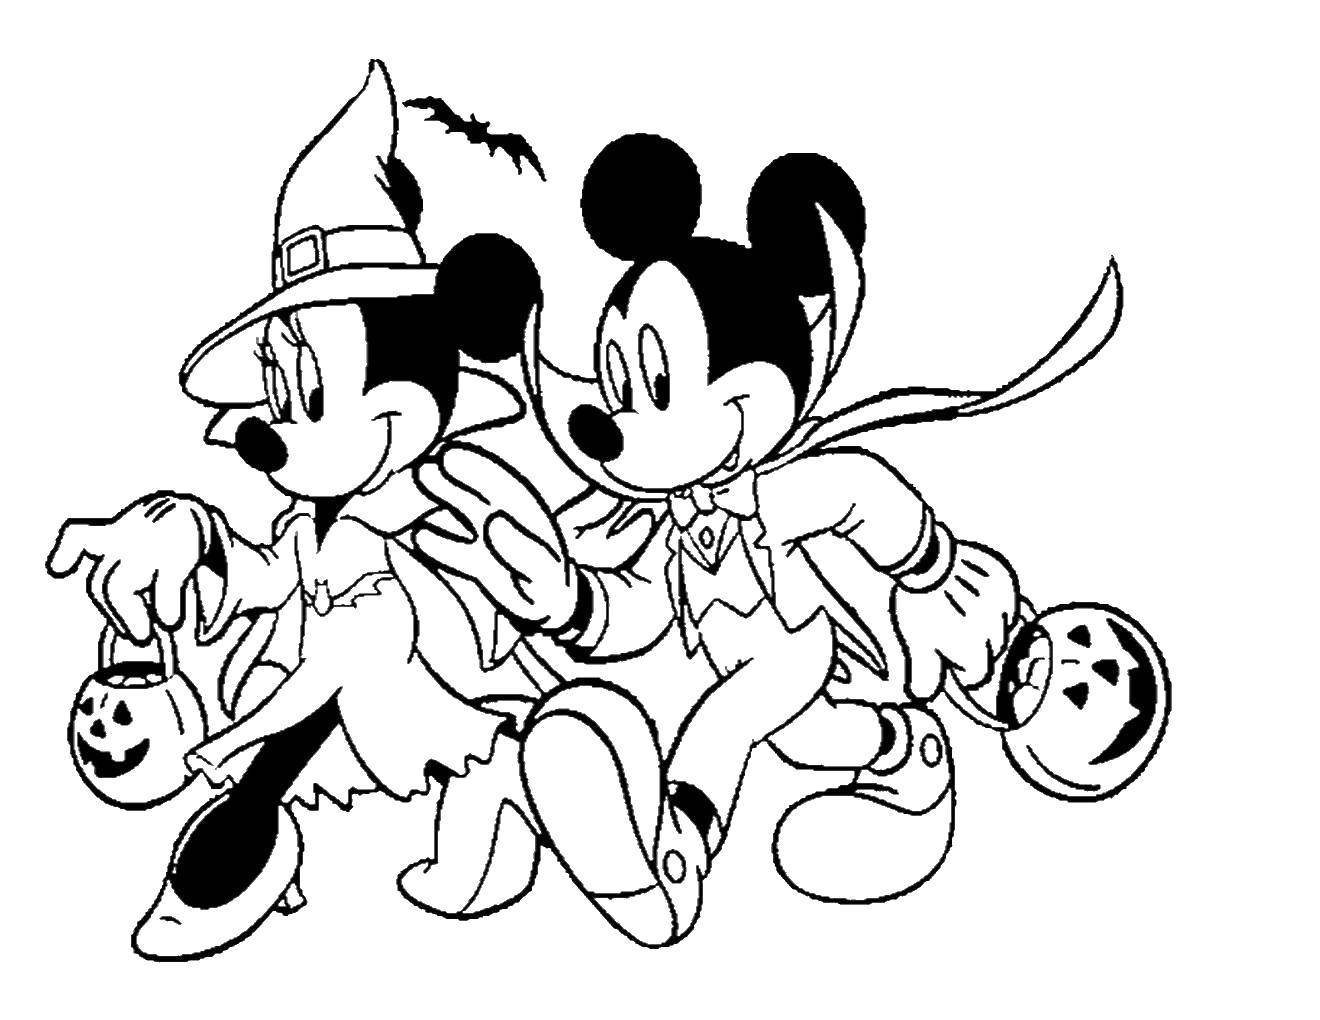 Coloring Mini and Mickey mouse on Halloween. Category Halloween. Tags:  Mickey mouse, Mini mouse, cartoons, Halloween.